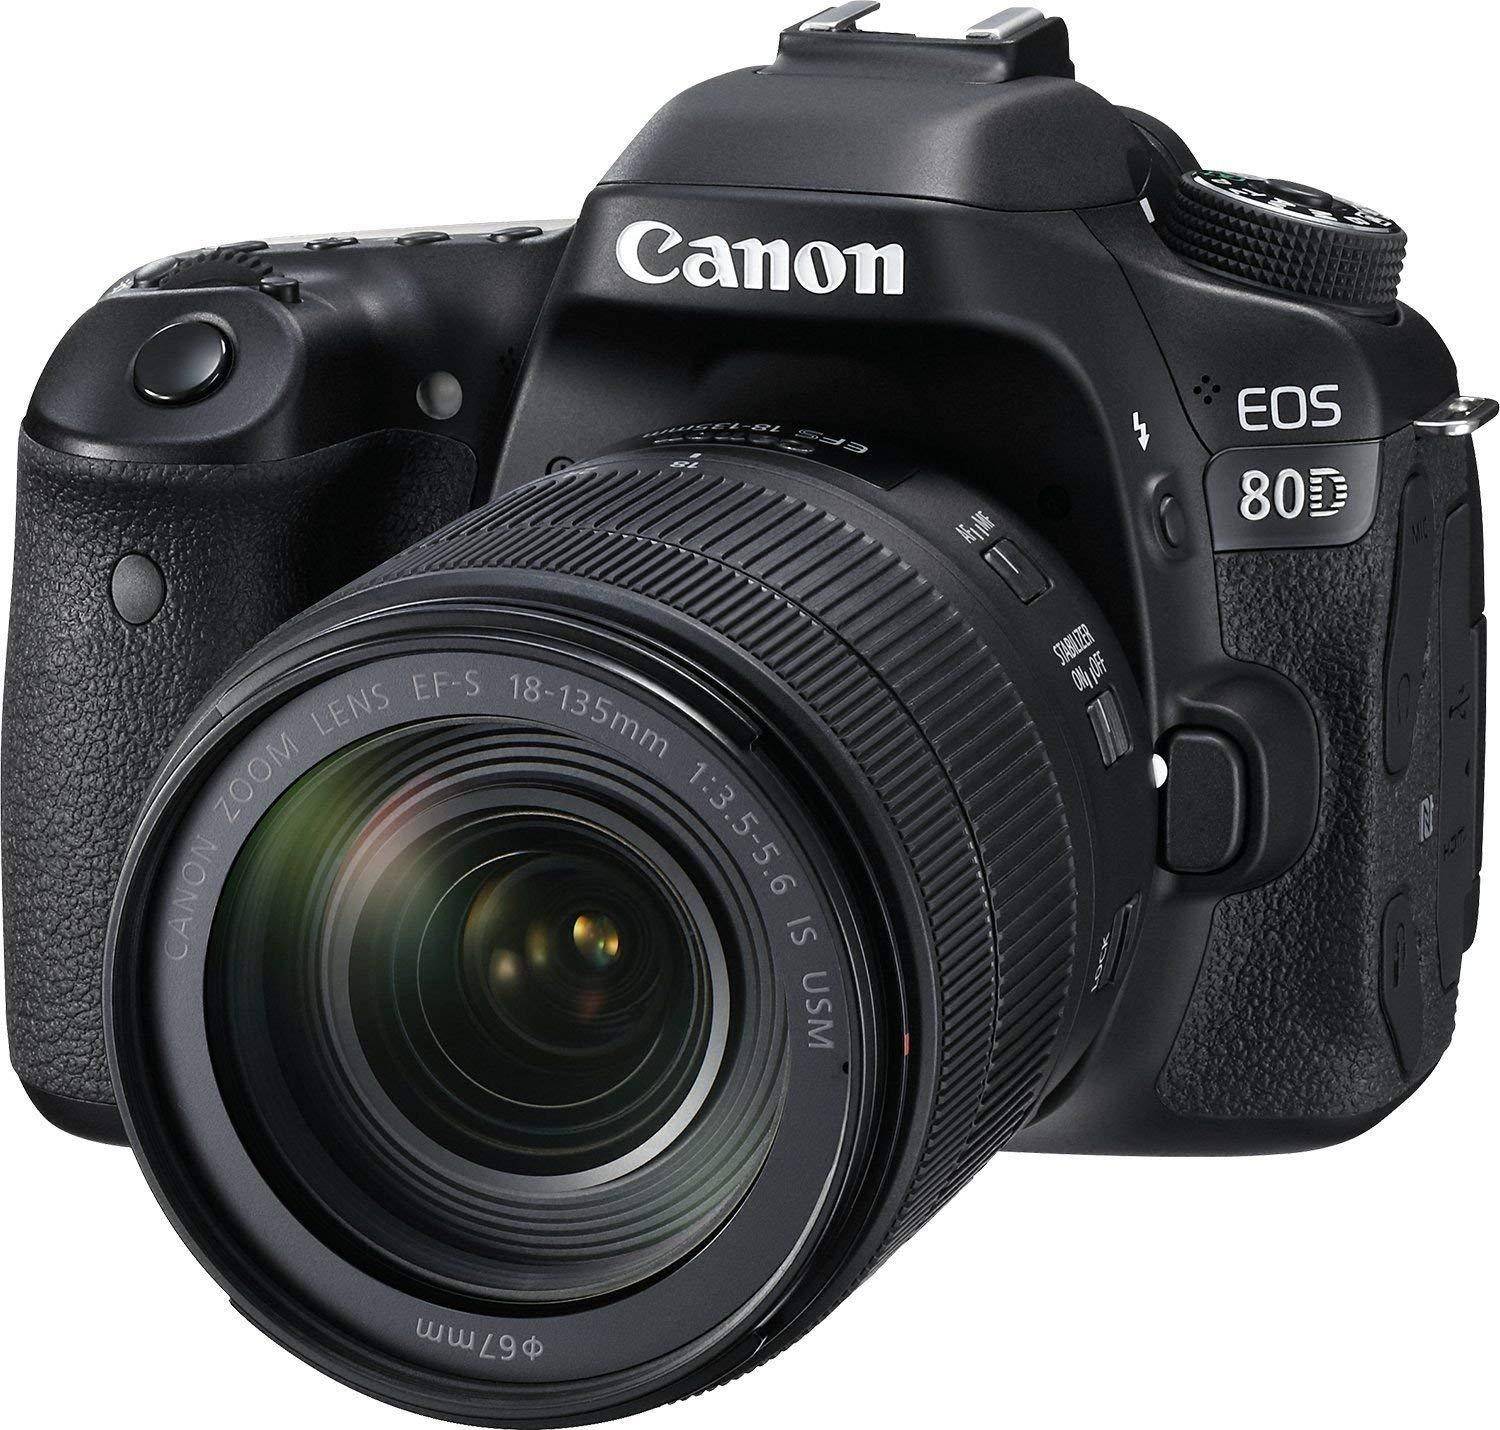 Buy Canon Eos 80d Dslr Camera With 18 135 Lens Online In India At Lowest Price Vplak 